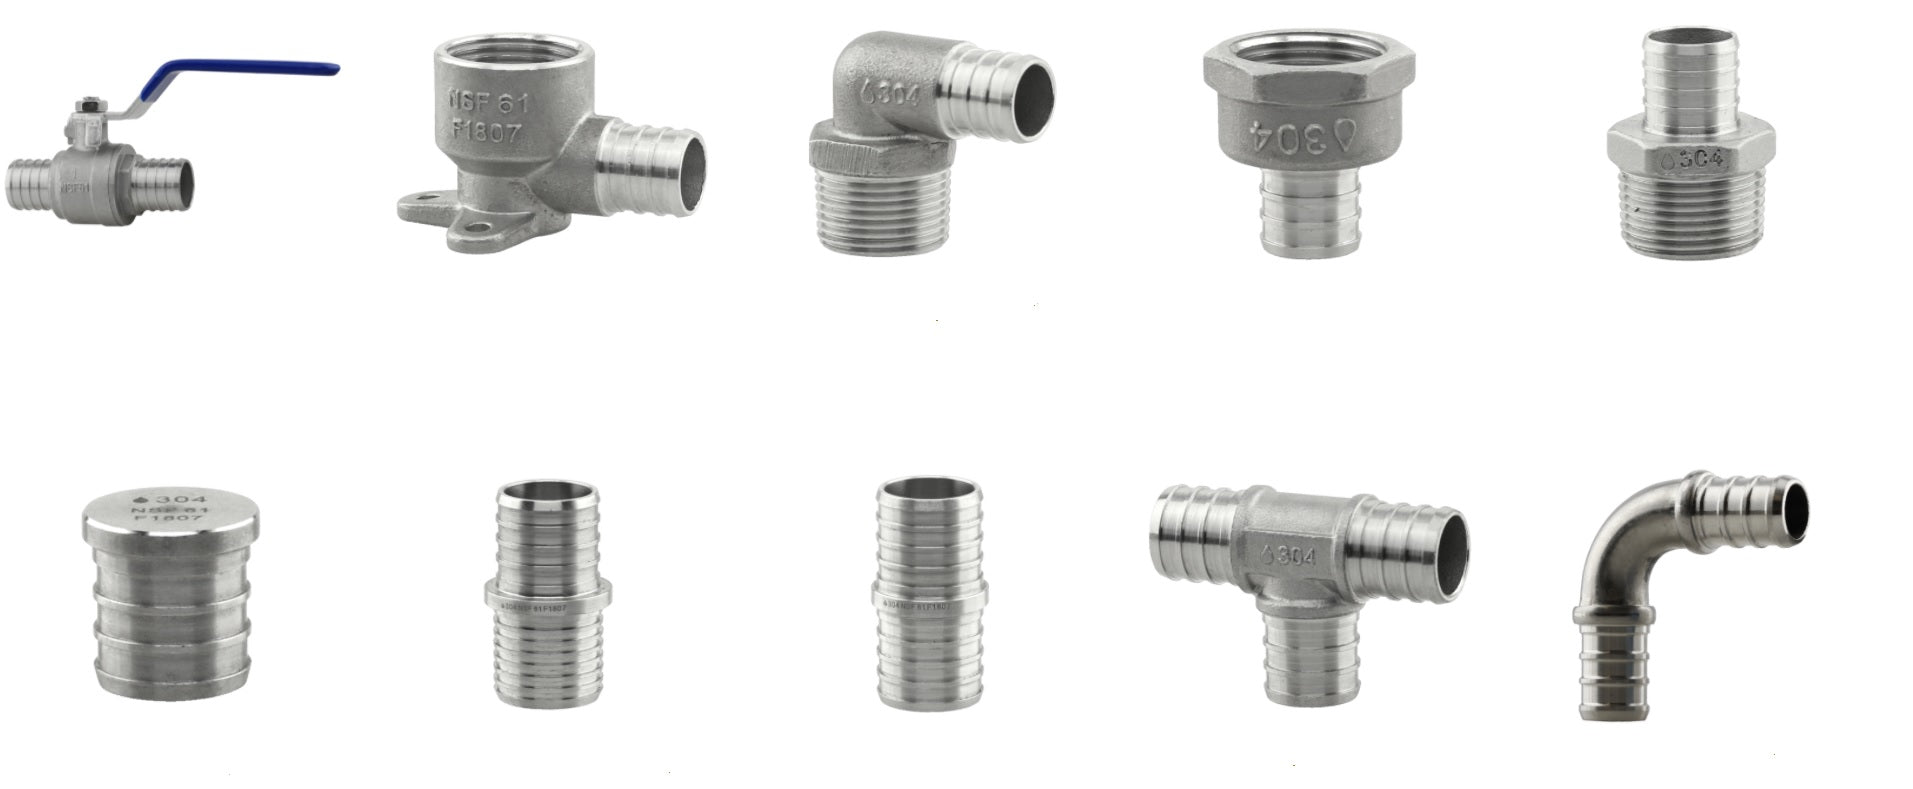 Stainless Steel Crimp PEX Fittings: The Ultimate Choice for Plumbing Efficiency